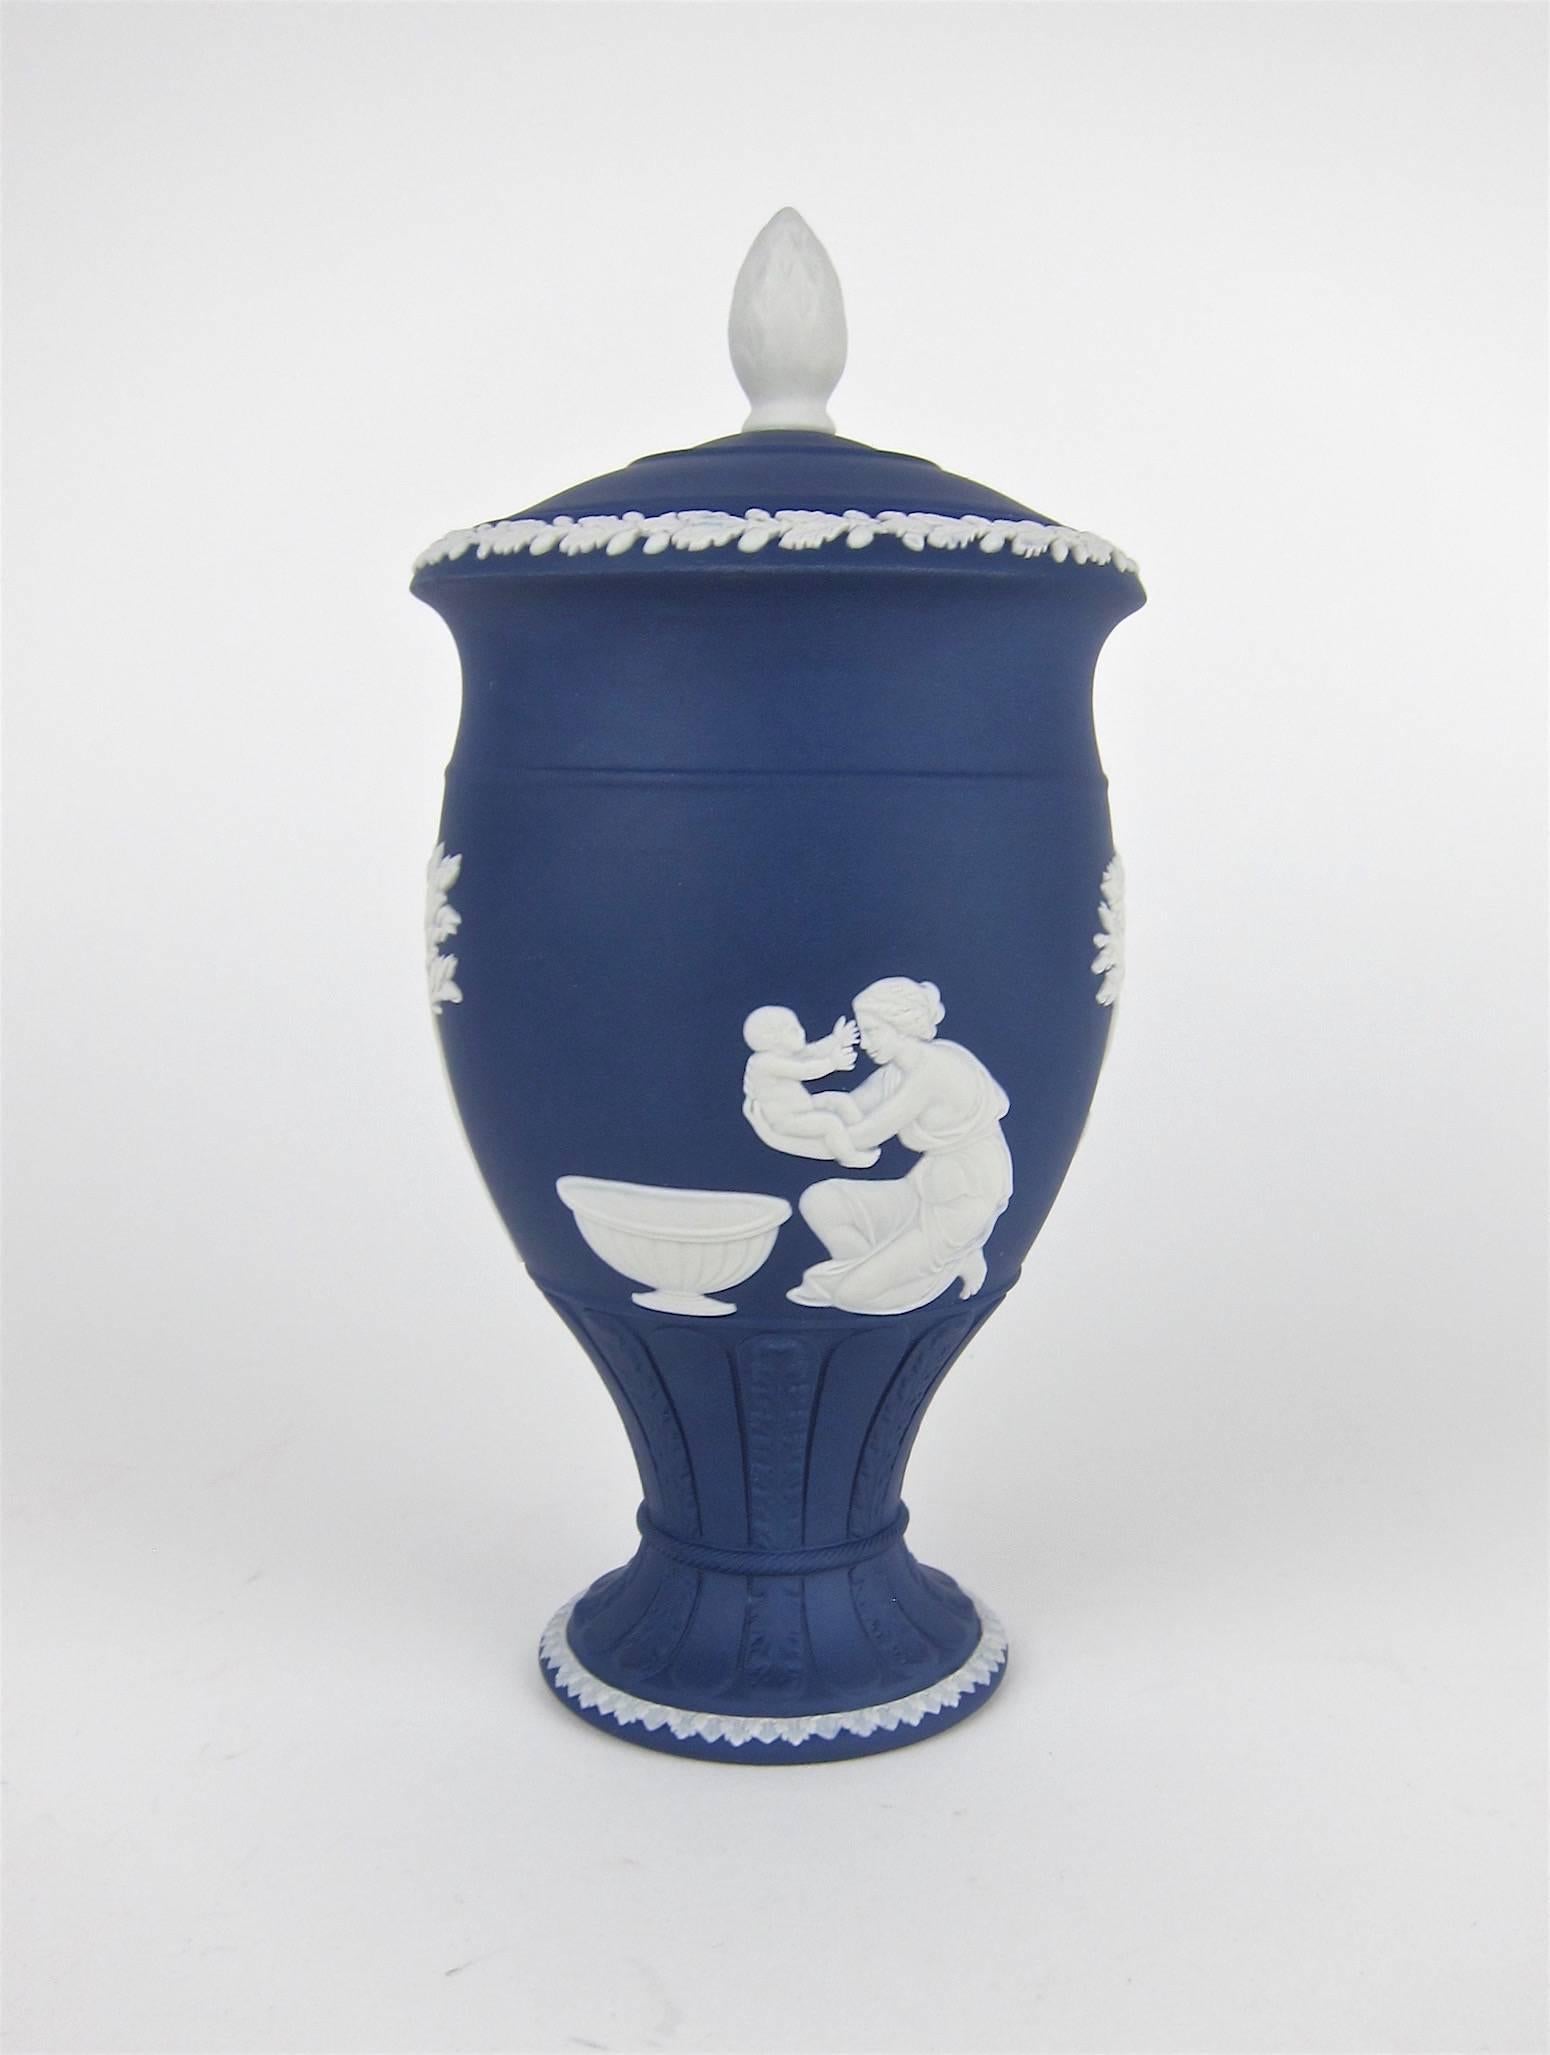 A covered vase in the shape of a Classical urn decorated with white on solid Portland Blue jasper ware from Wedgwood of England. The Neoclassical bas-relief decor depicts scenes of Achilles with his Mother interspersed with trees. The lid features a